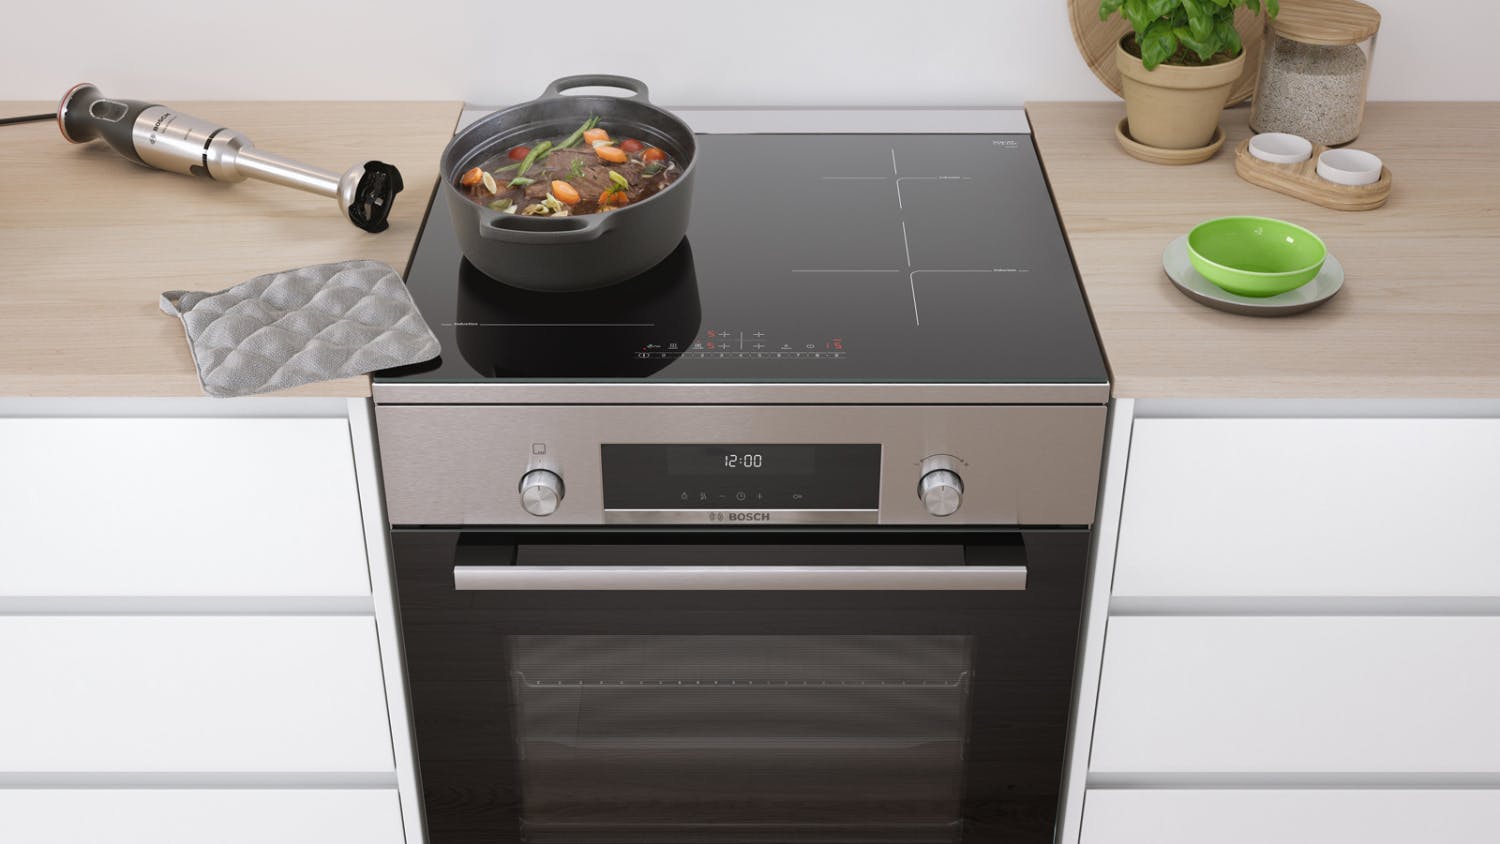 Bosch 60cm Pyrolytic Freestanding Oven with Induction Cooktop - Stainless Steel (Series 6/HLS79R351A)